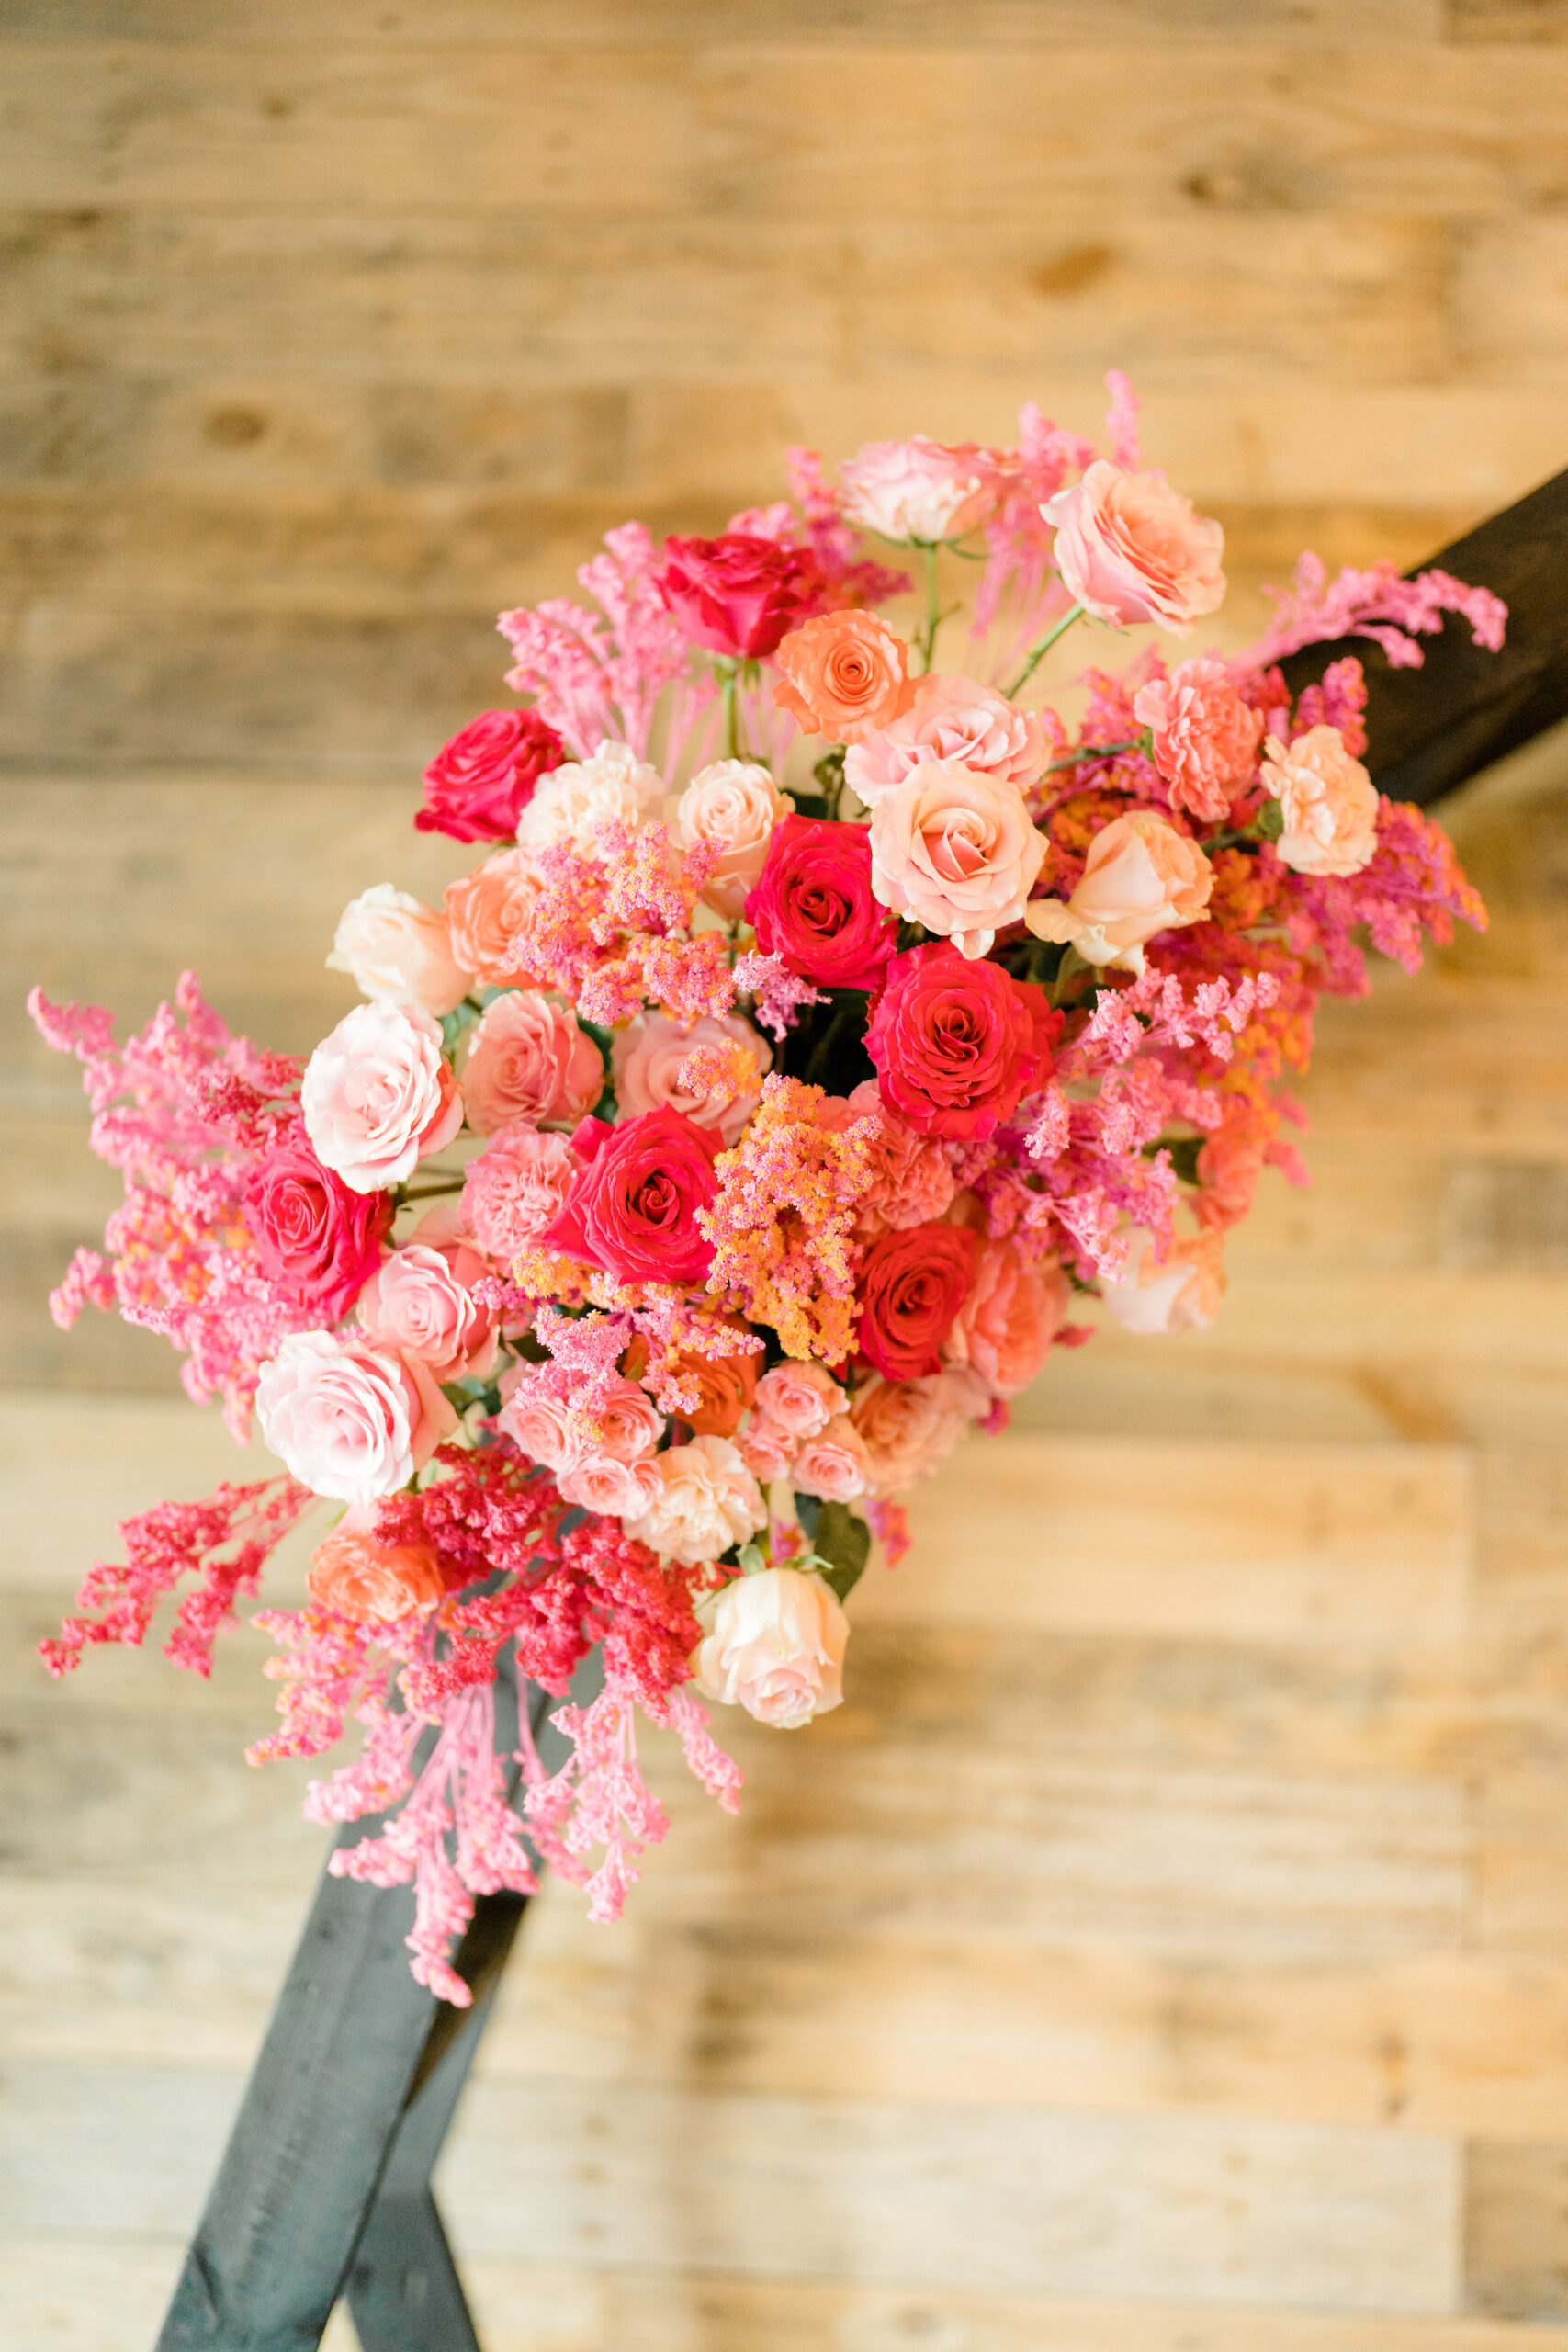 Whimsical Spring Lush Flowers, Pink Roses and Fuchsia Ceremony Flowers